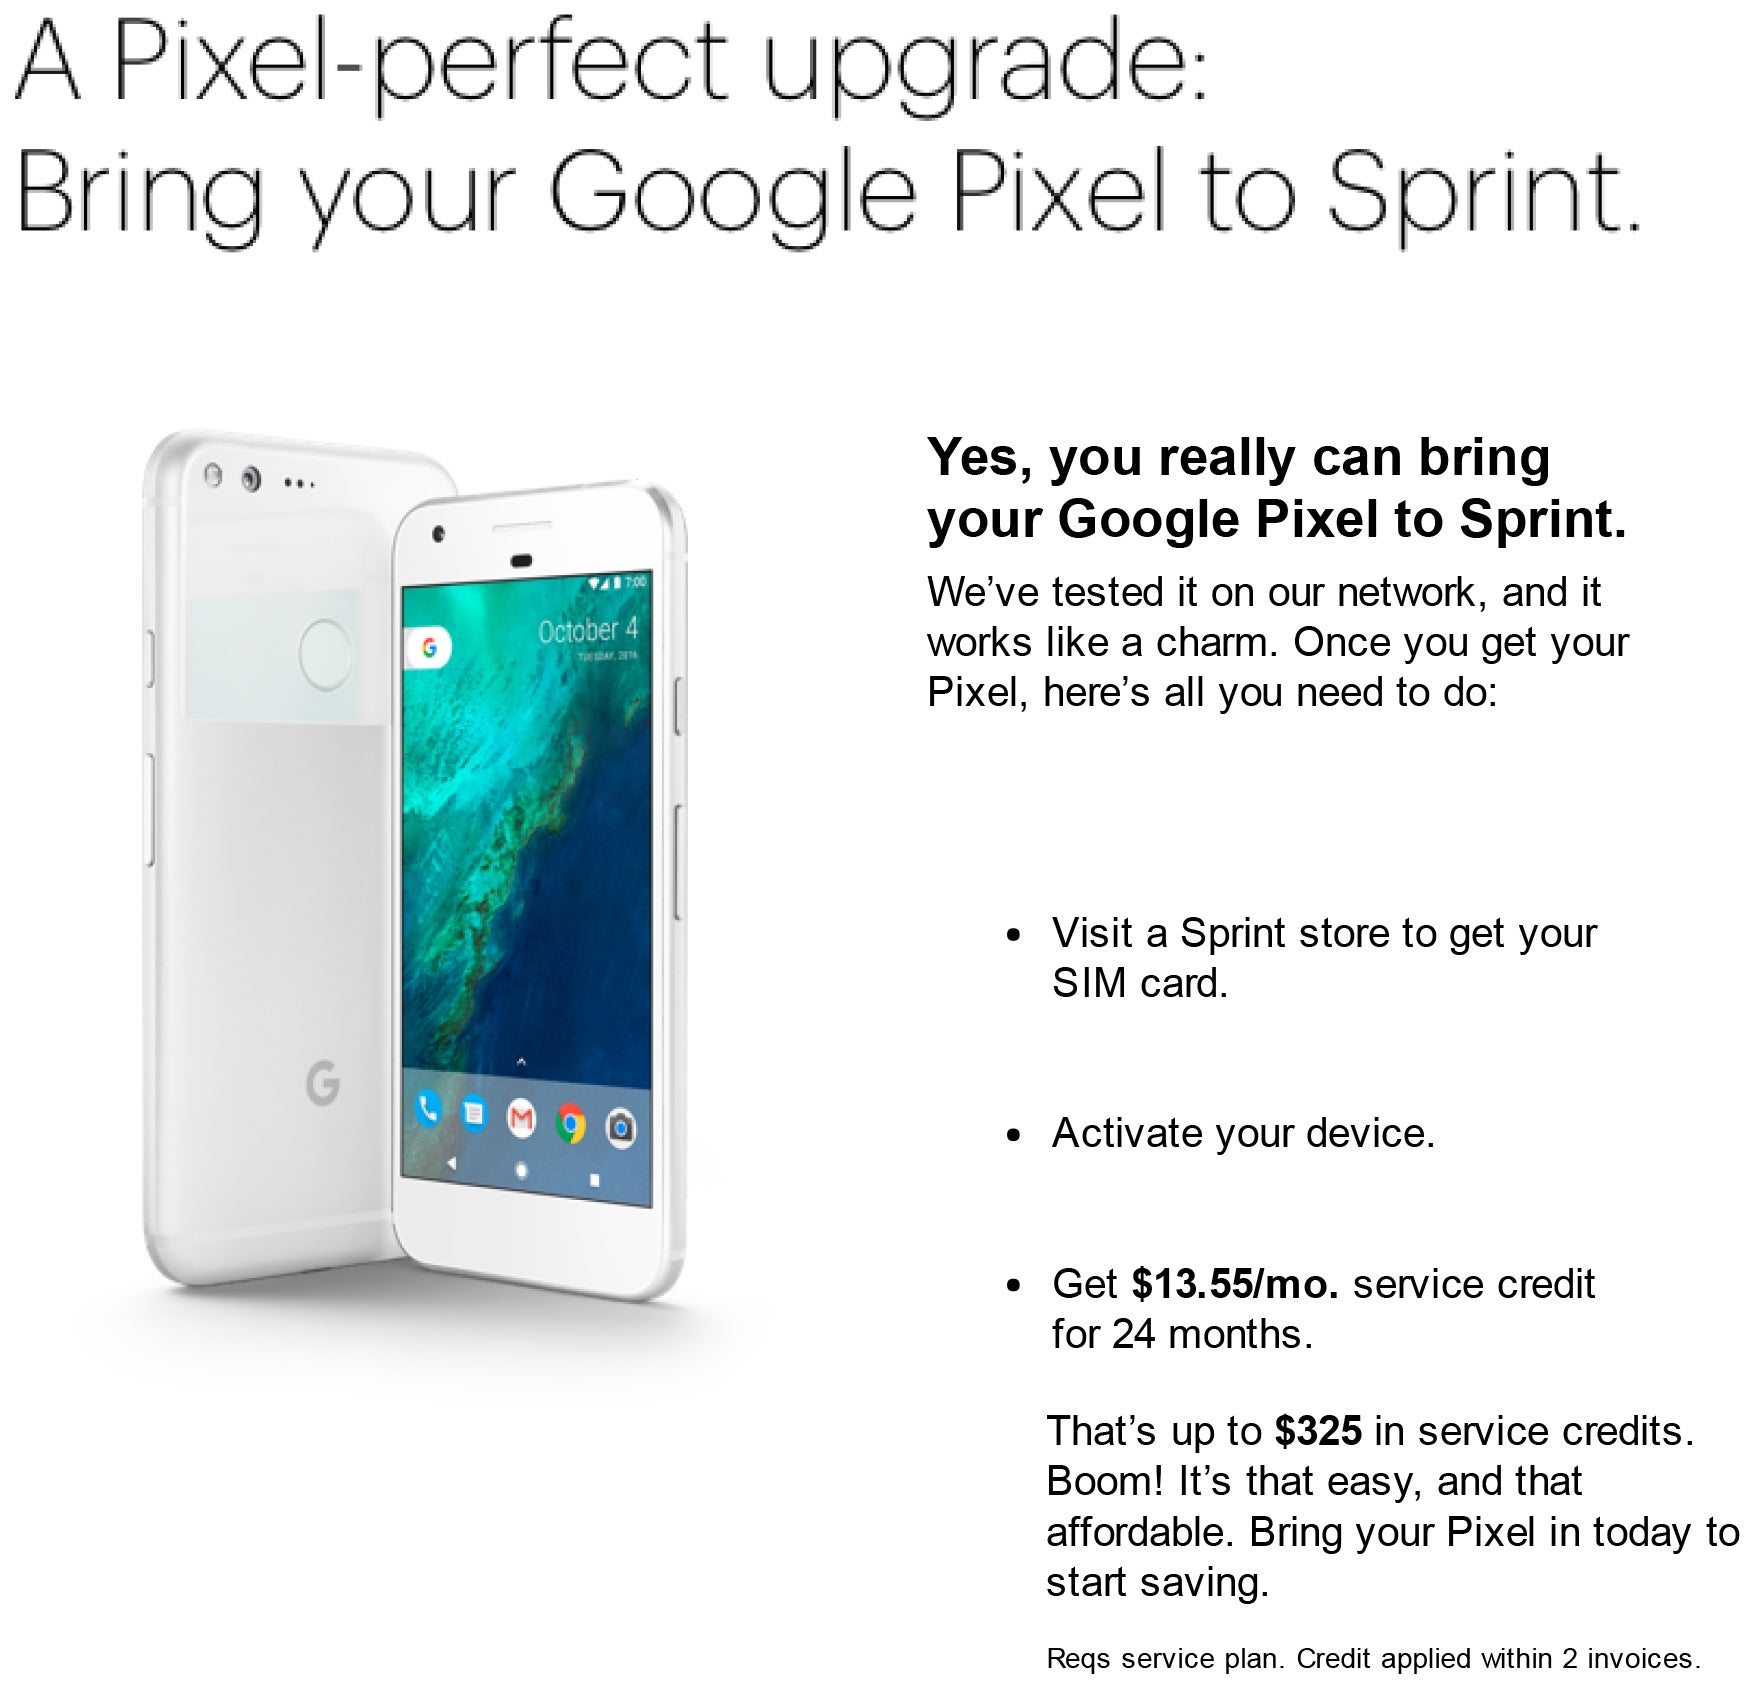 Got a new Pixel? Activate it on Sprint and get up to $325 of your cash back. Well, sort of